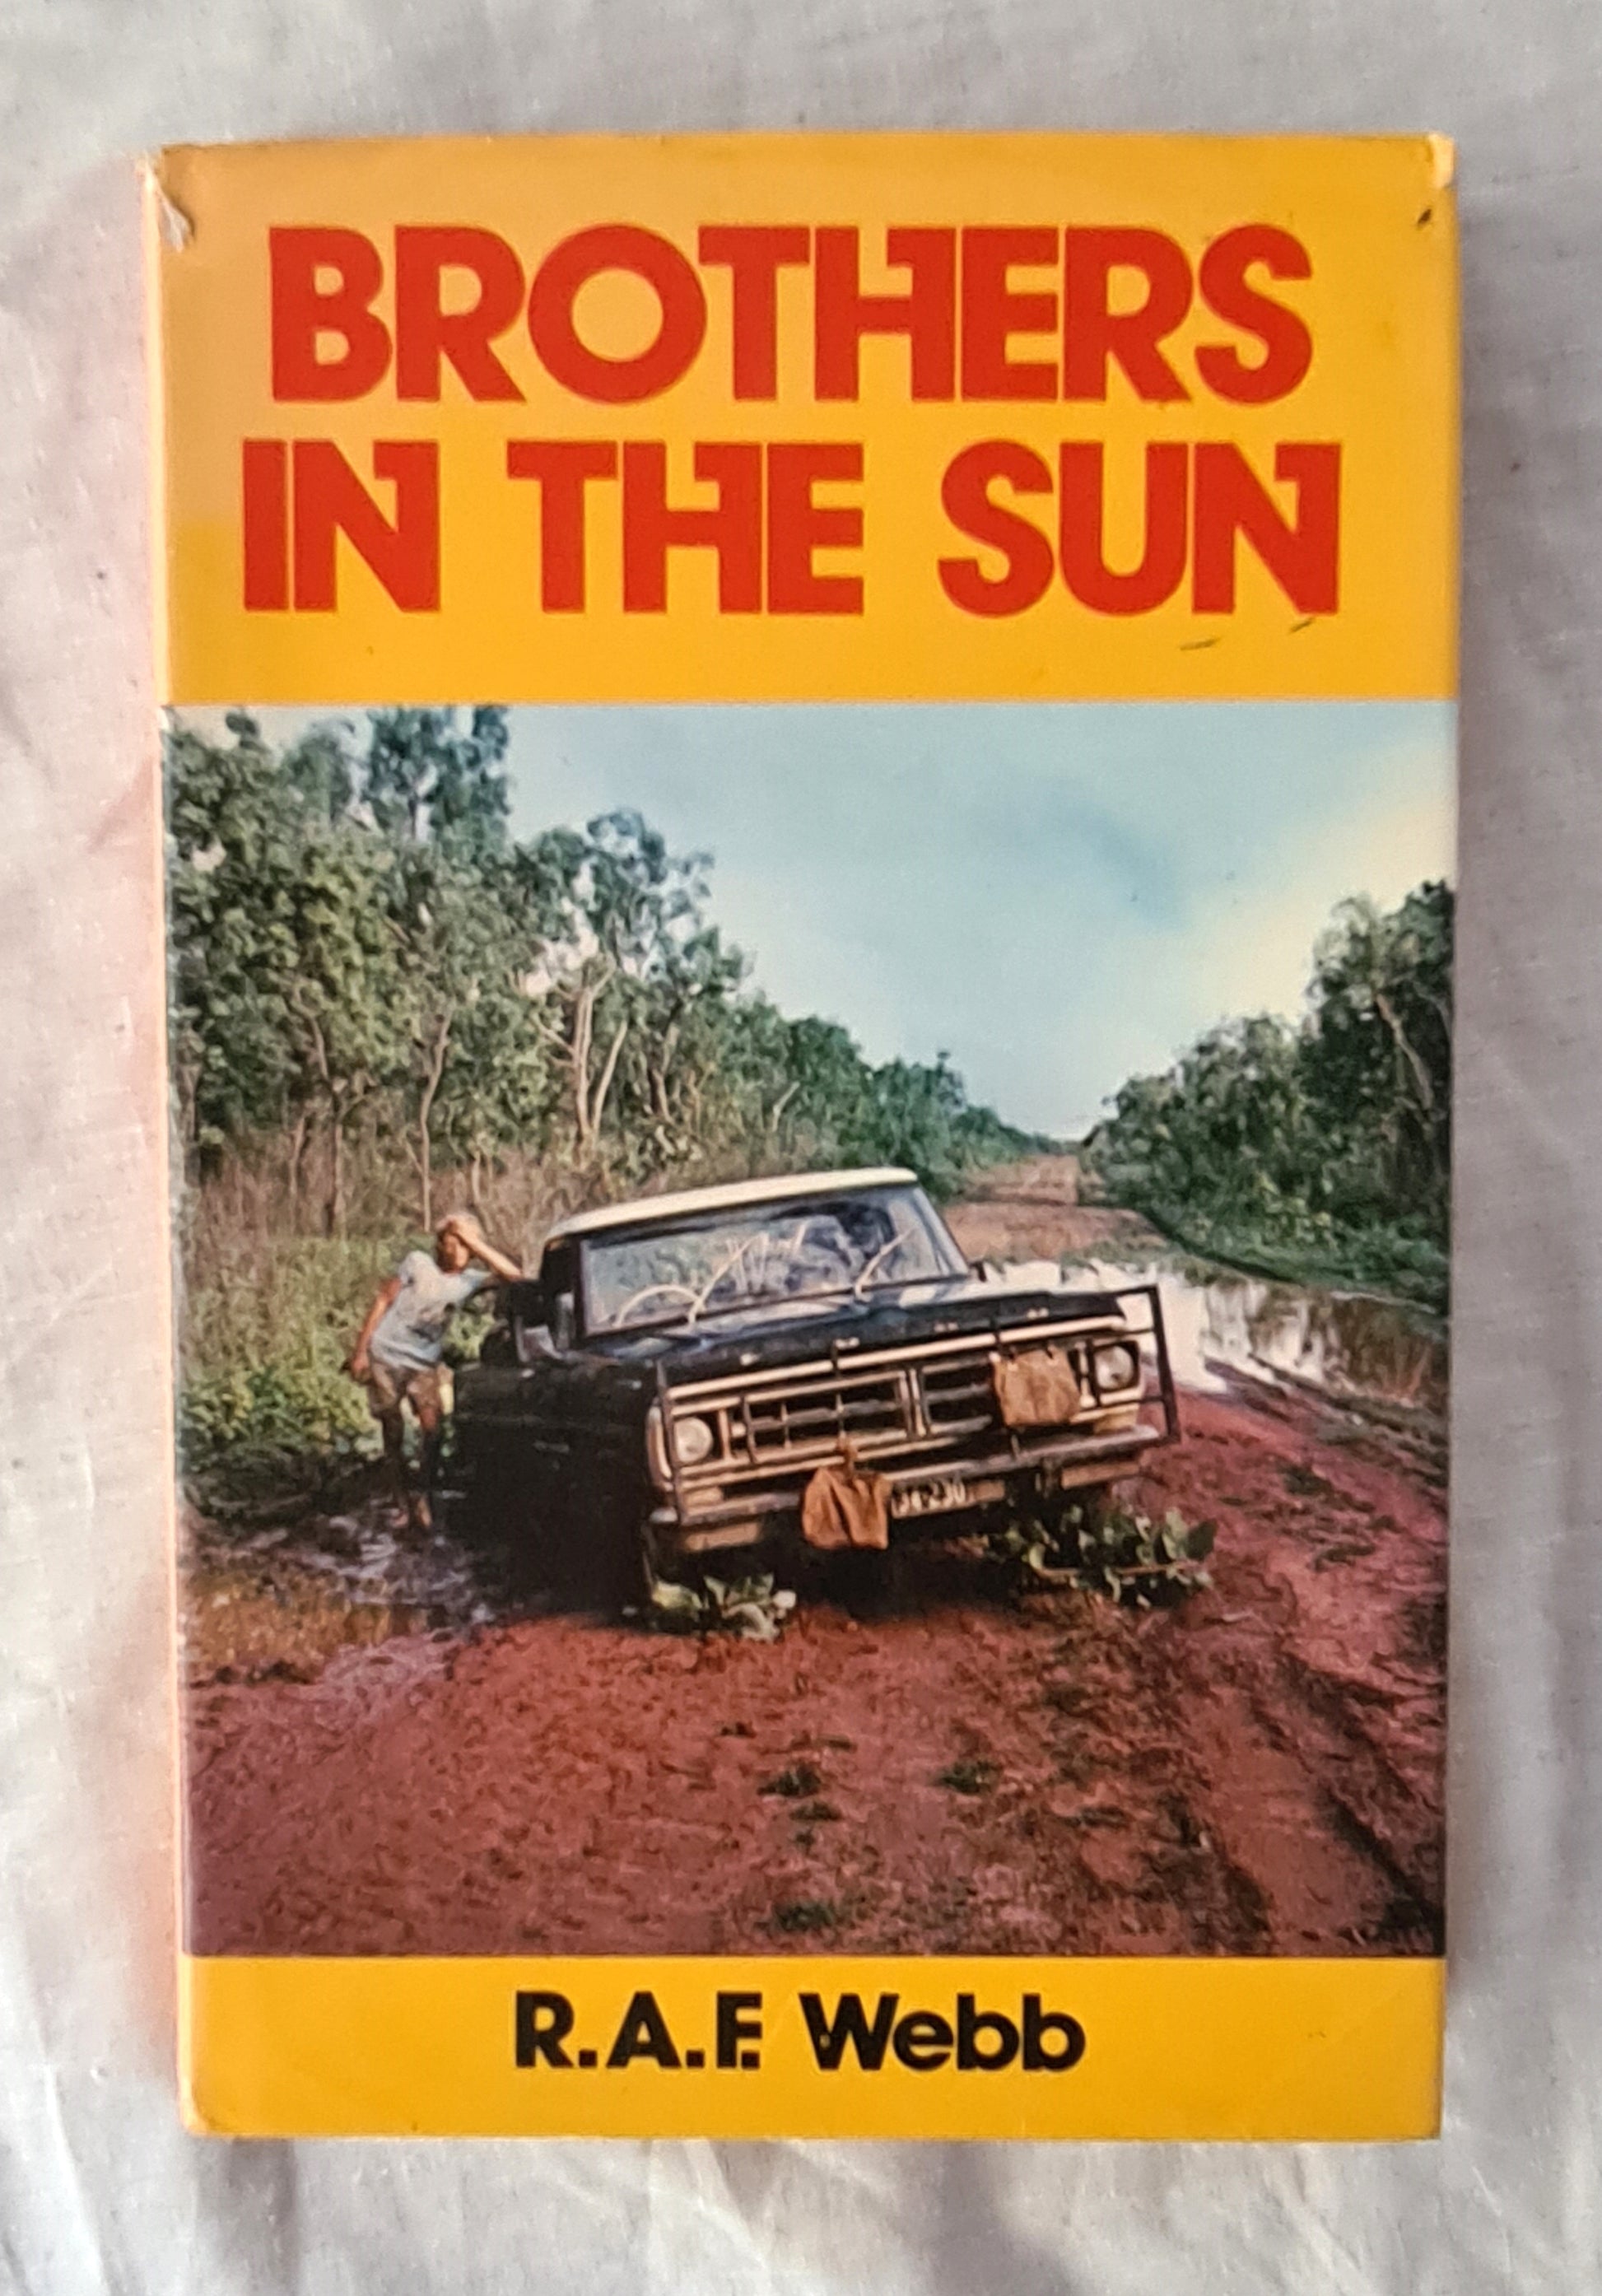 Brothers In The Sun  A History of the Bush Brotherhood Movement in the Outback of Australia  by R. A. F. Webb